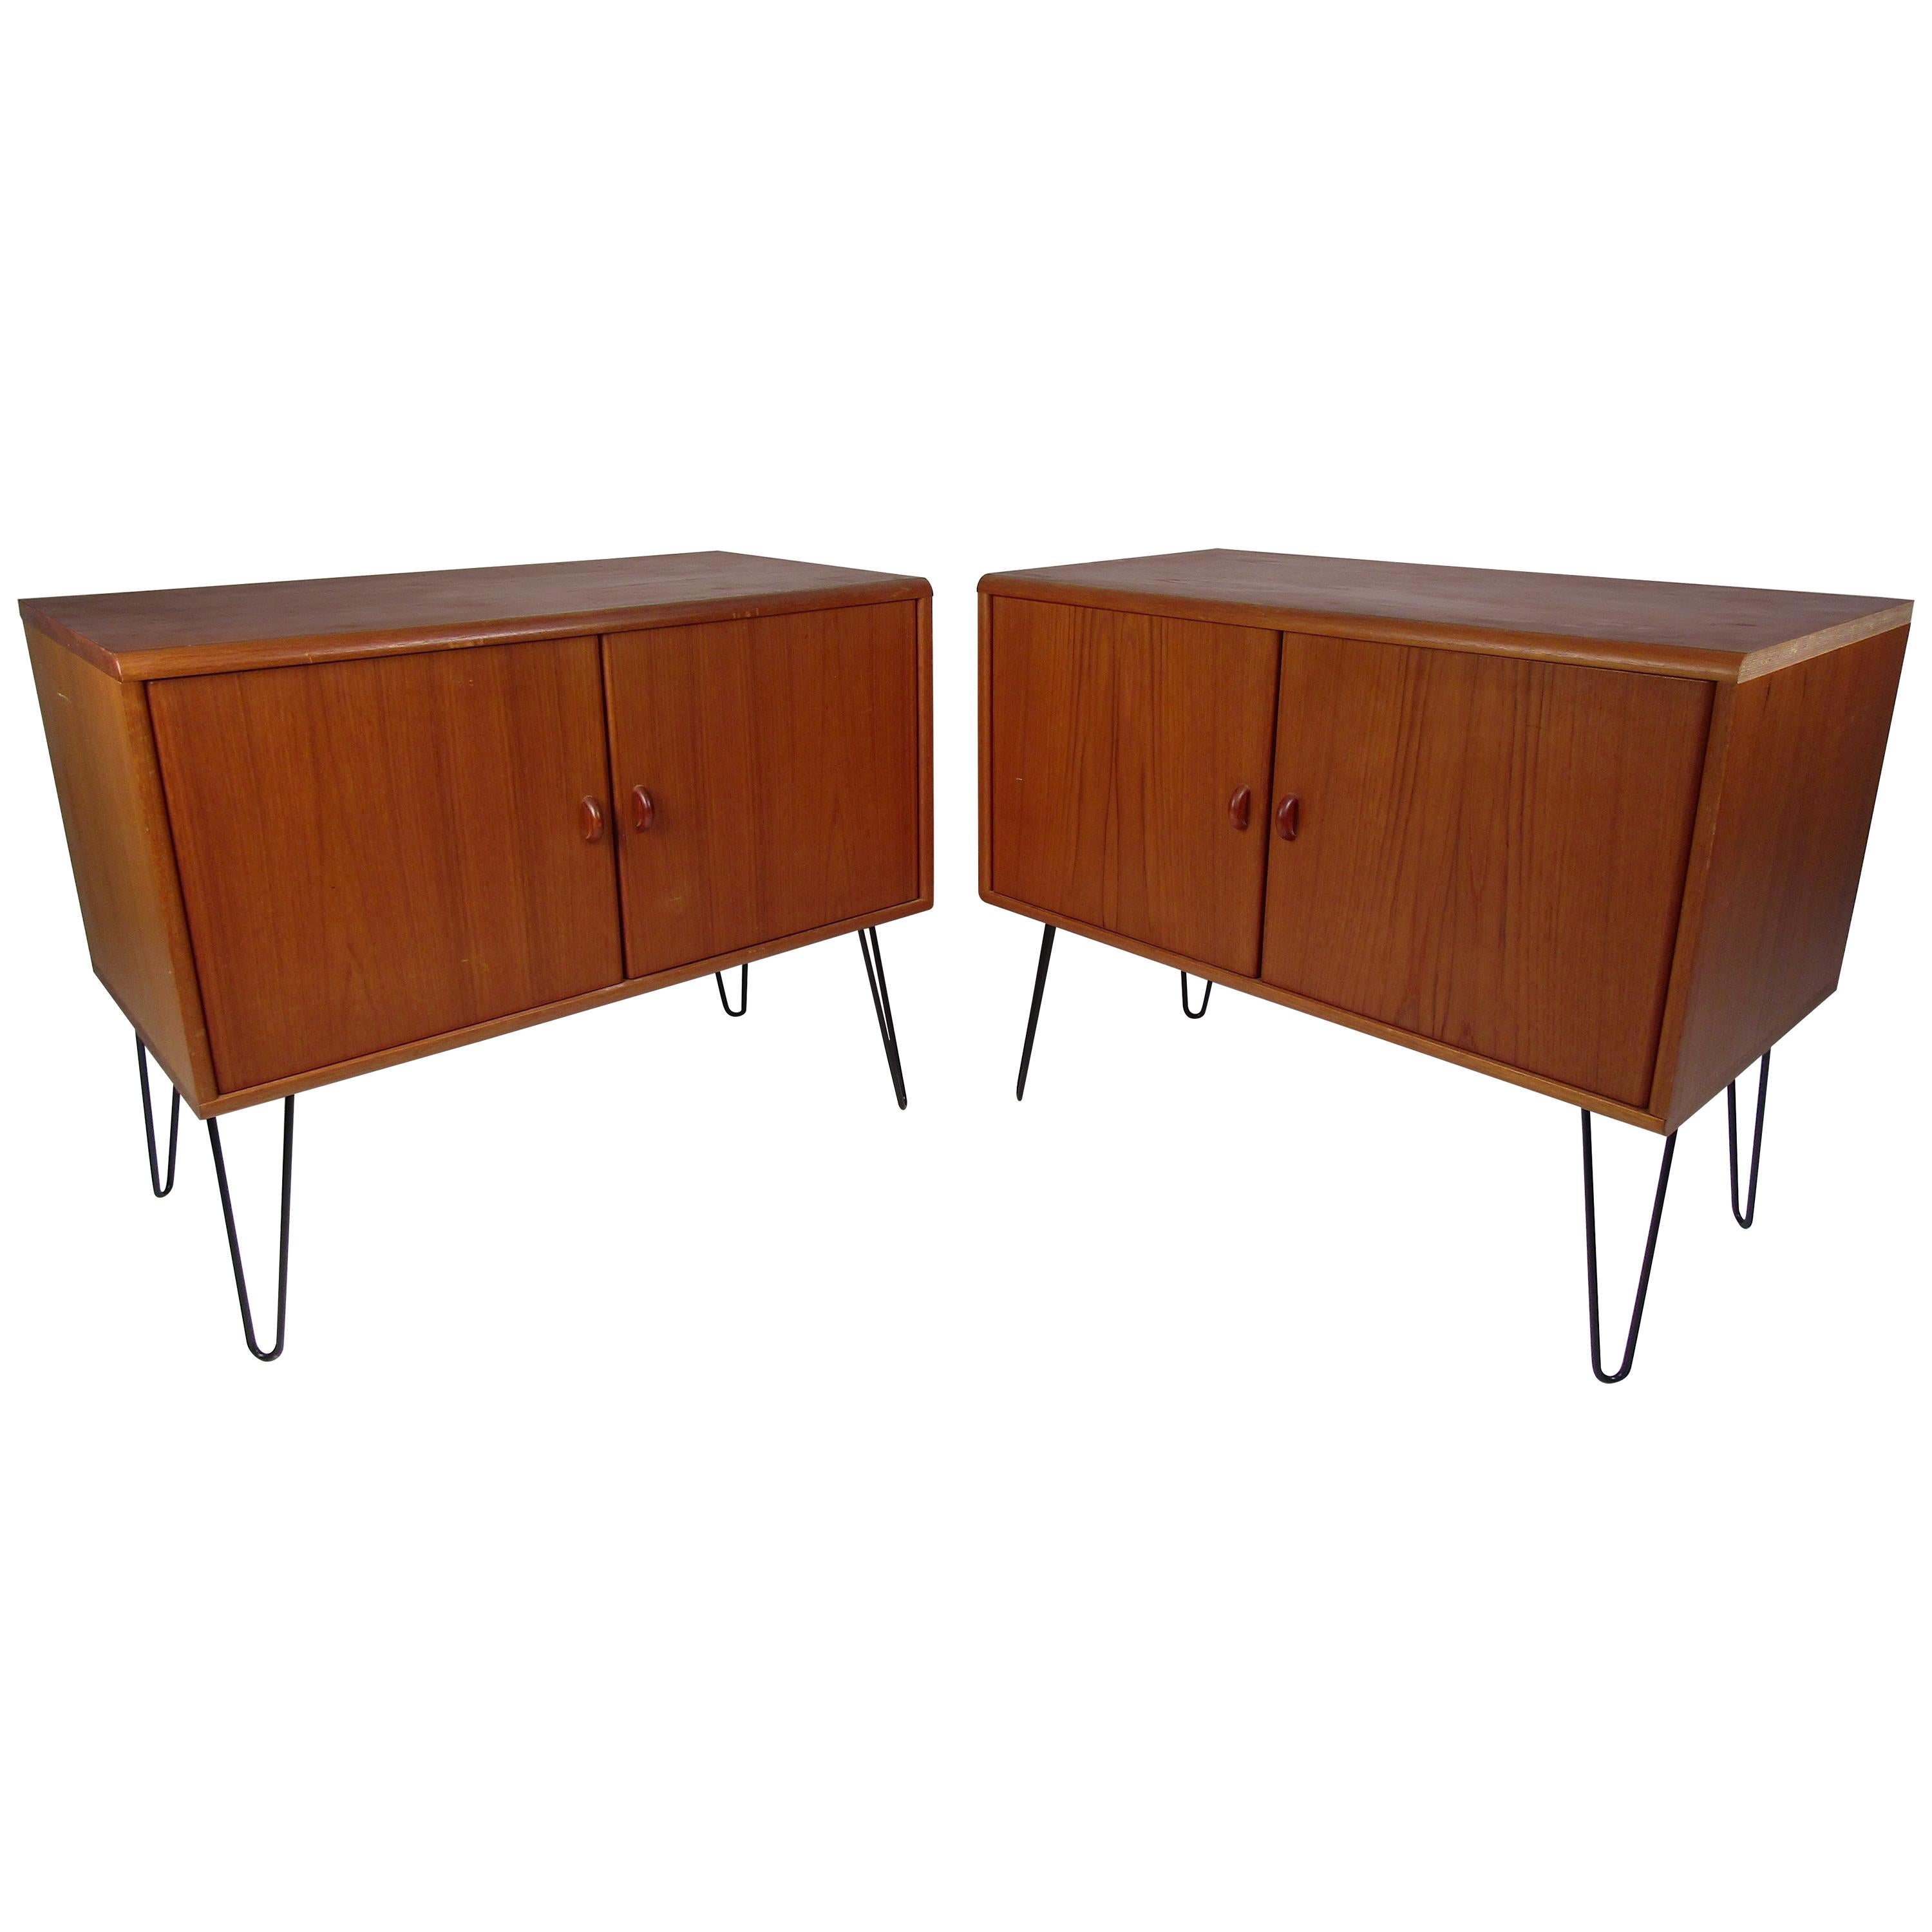 Pair of Midcentury Teak Cabinets with Hairpin Legs For Sale